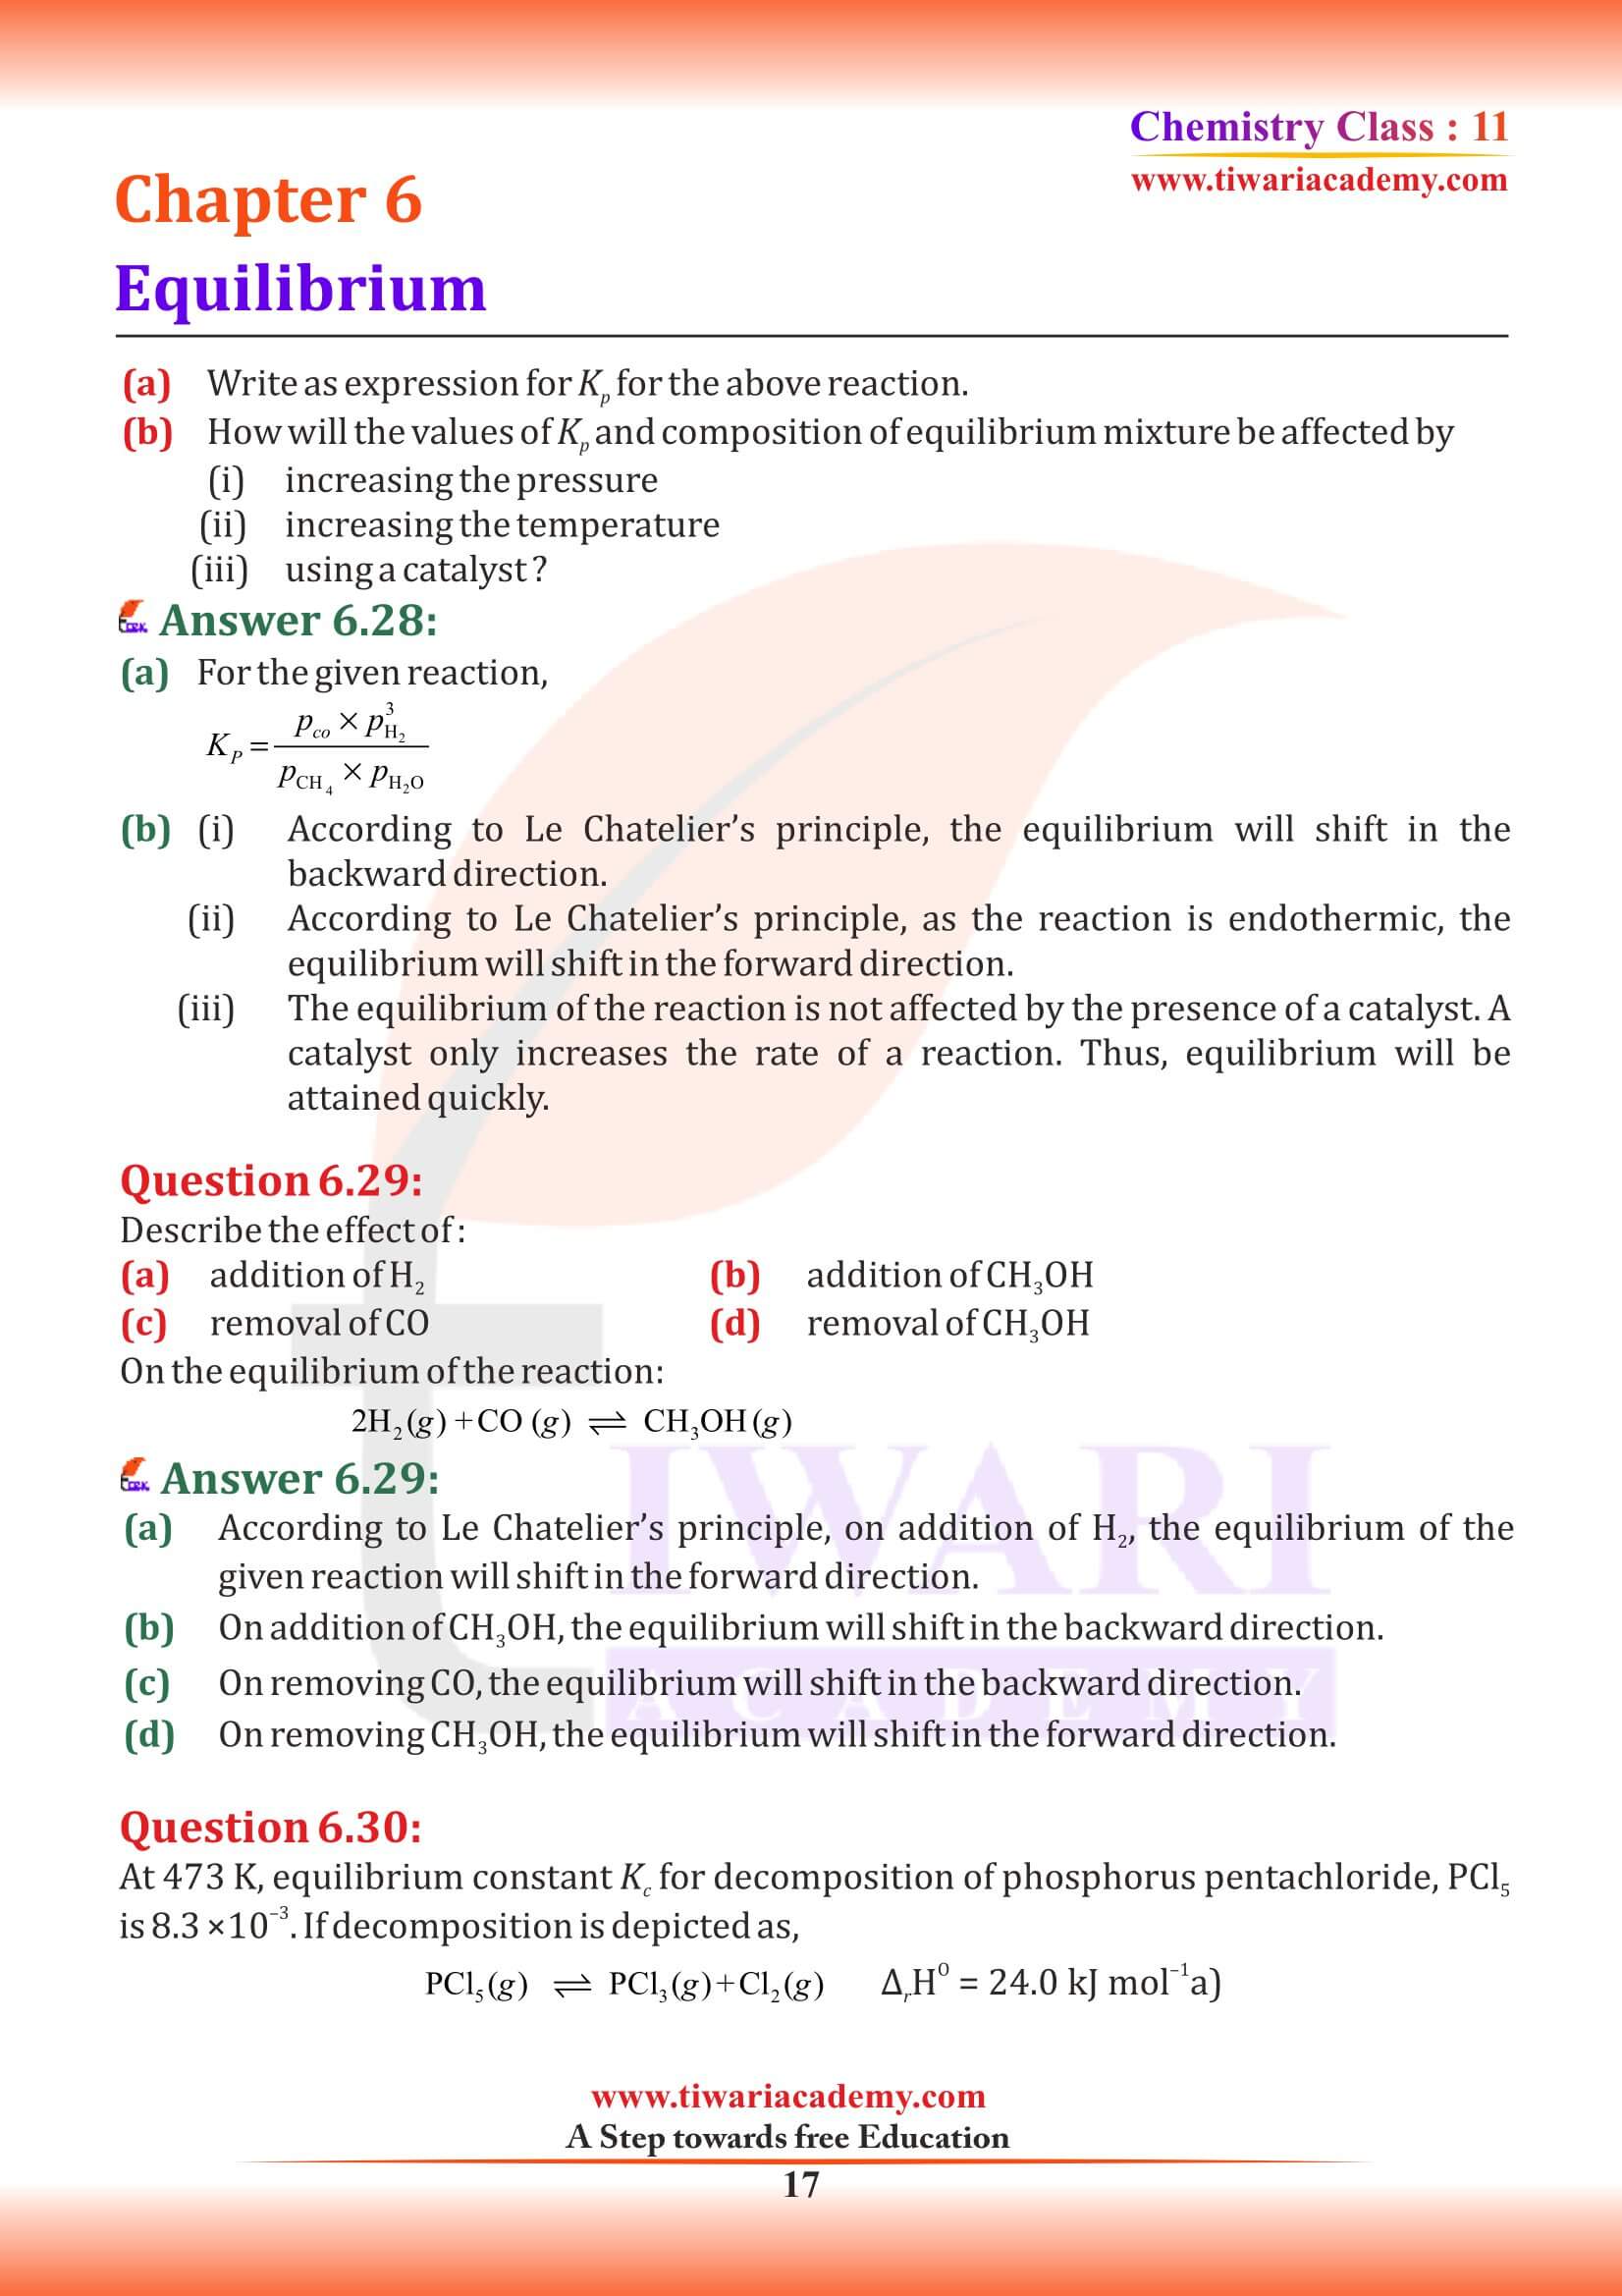 Class 11 Chemistry Chapter 6 Textbook answers